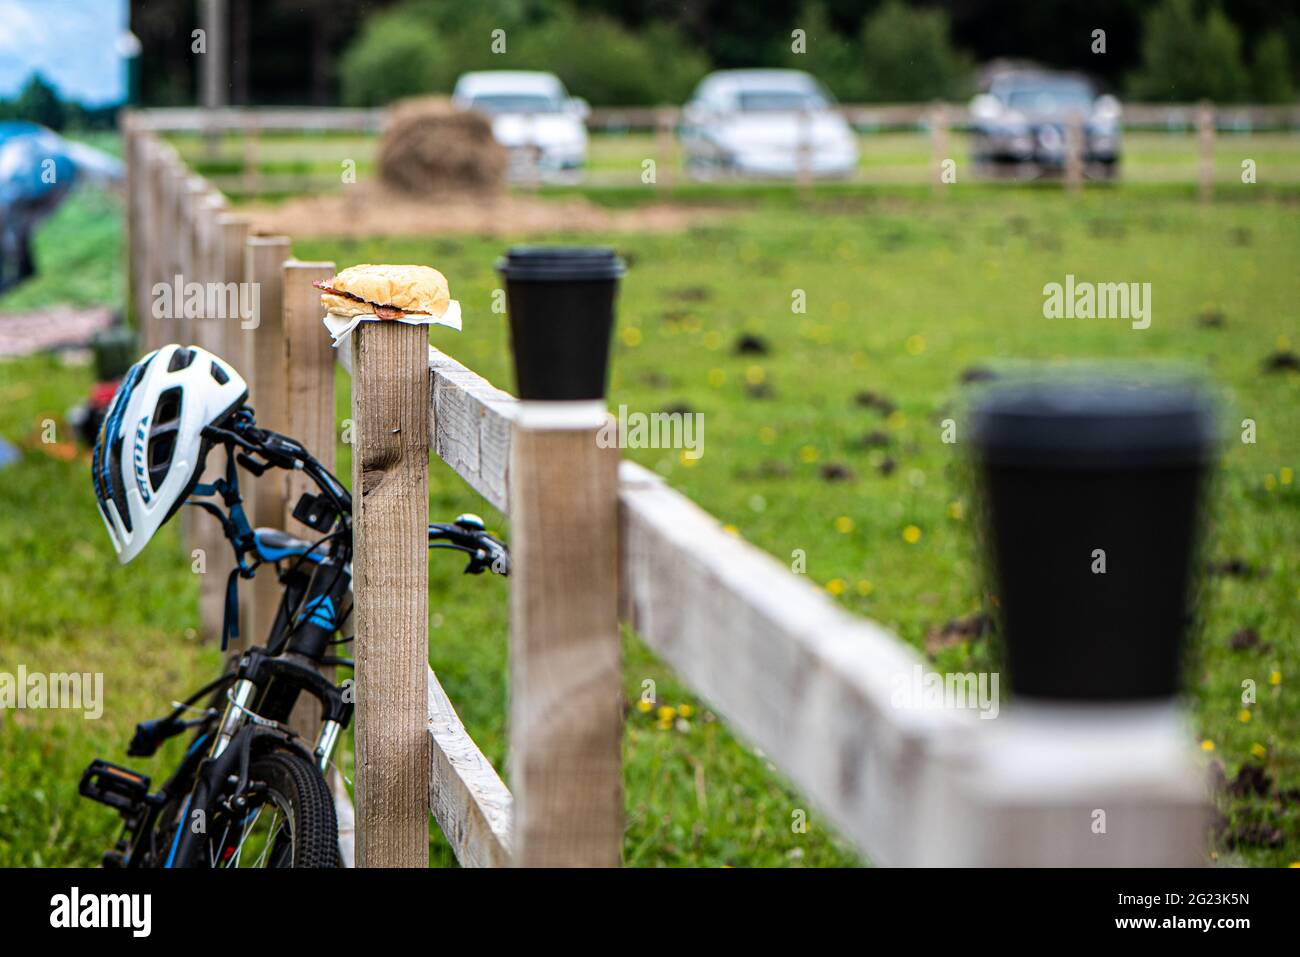 Cooke cups and a bacon bap next to a bicycle at the Horse show at the National Horseracing College, Doncaster, UK Stock Photo